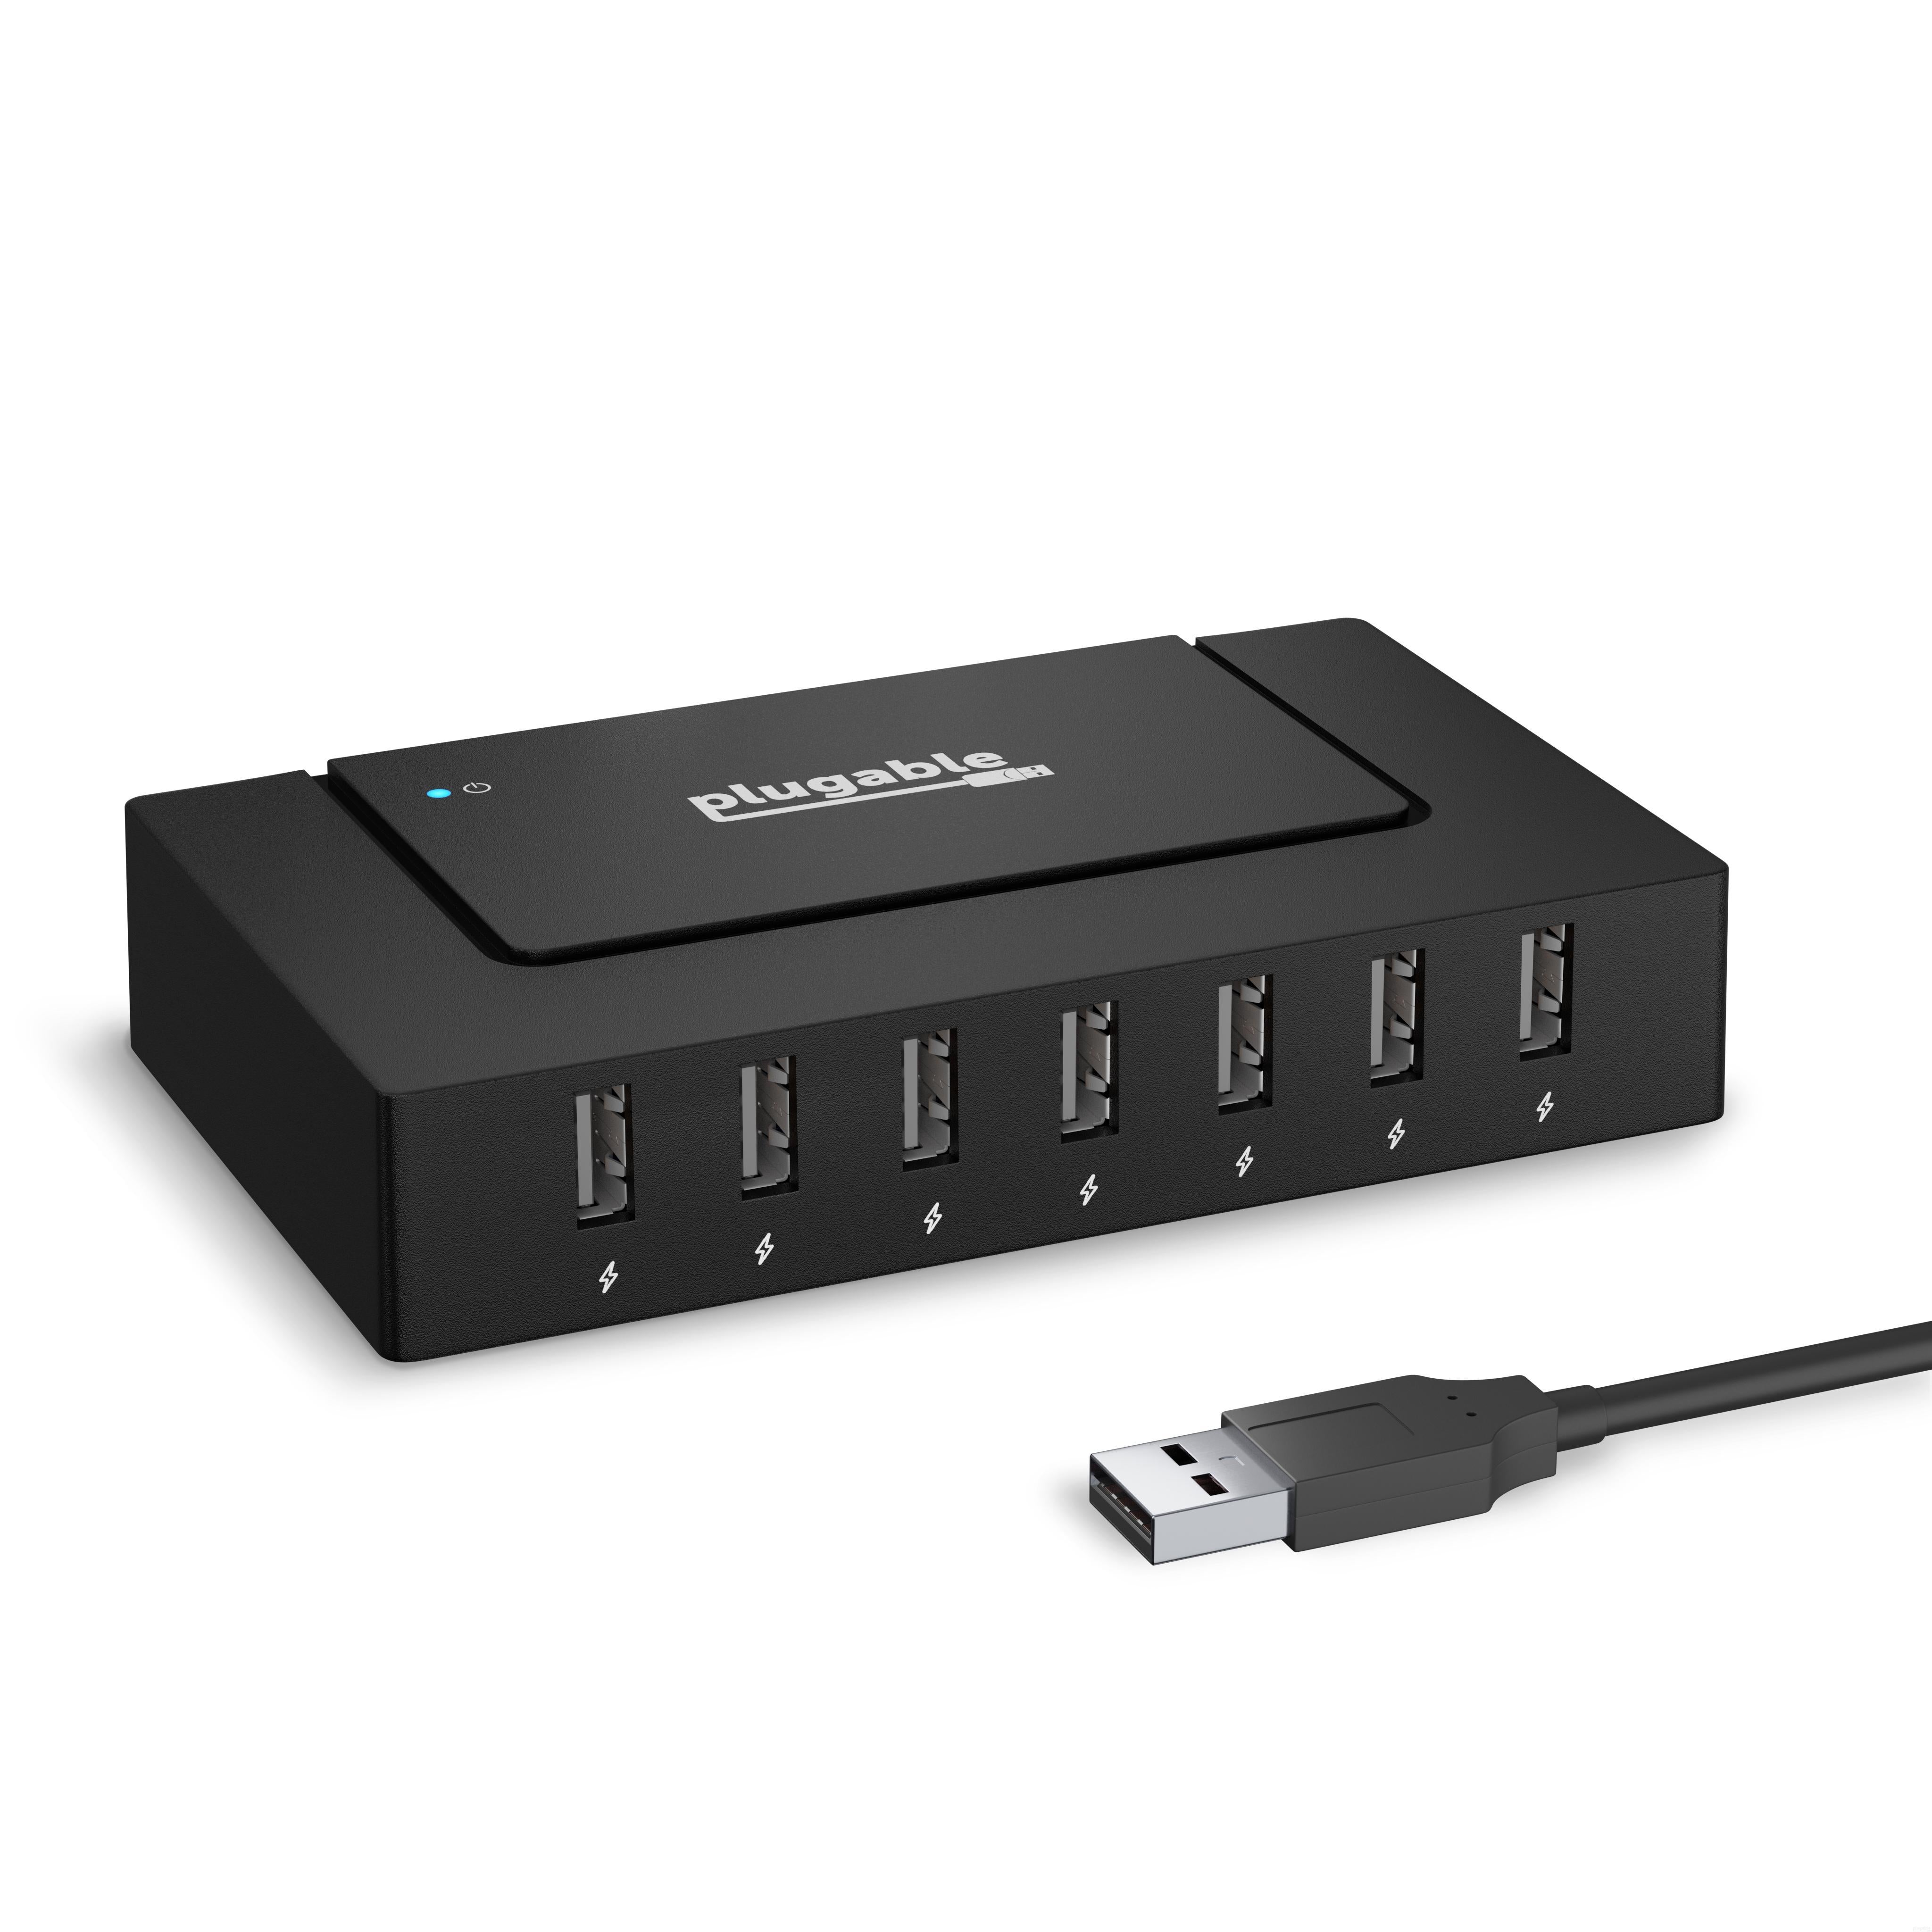 Plugable USB 2.0 7-Port with 60W Power Adapter – Technologies